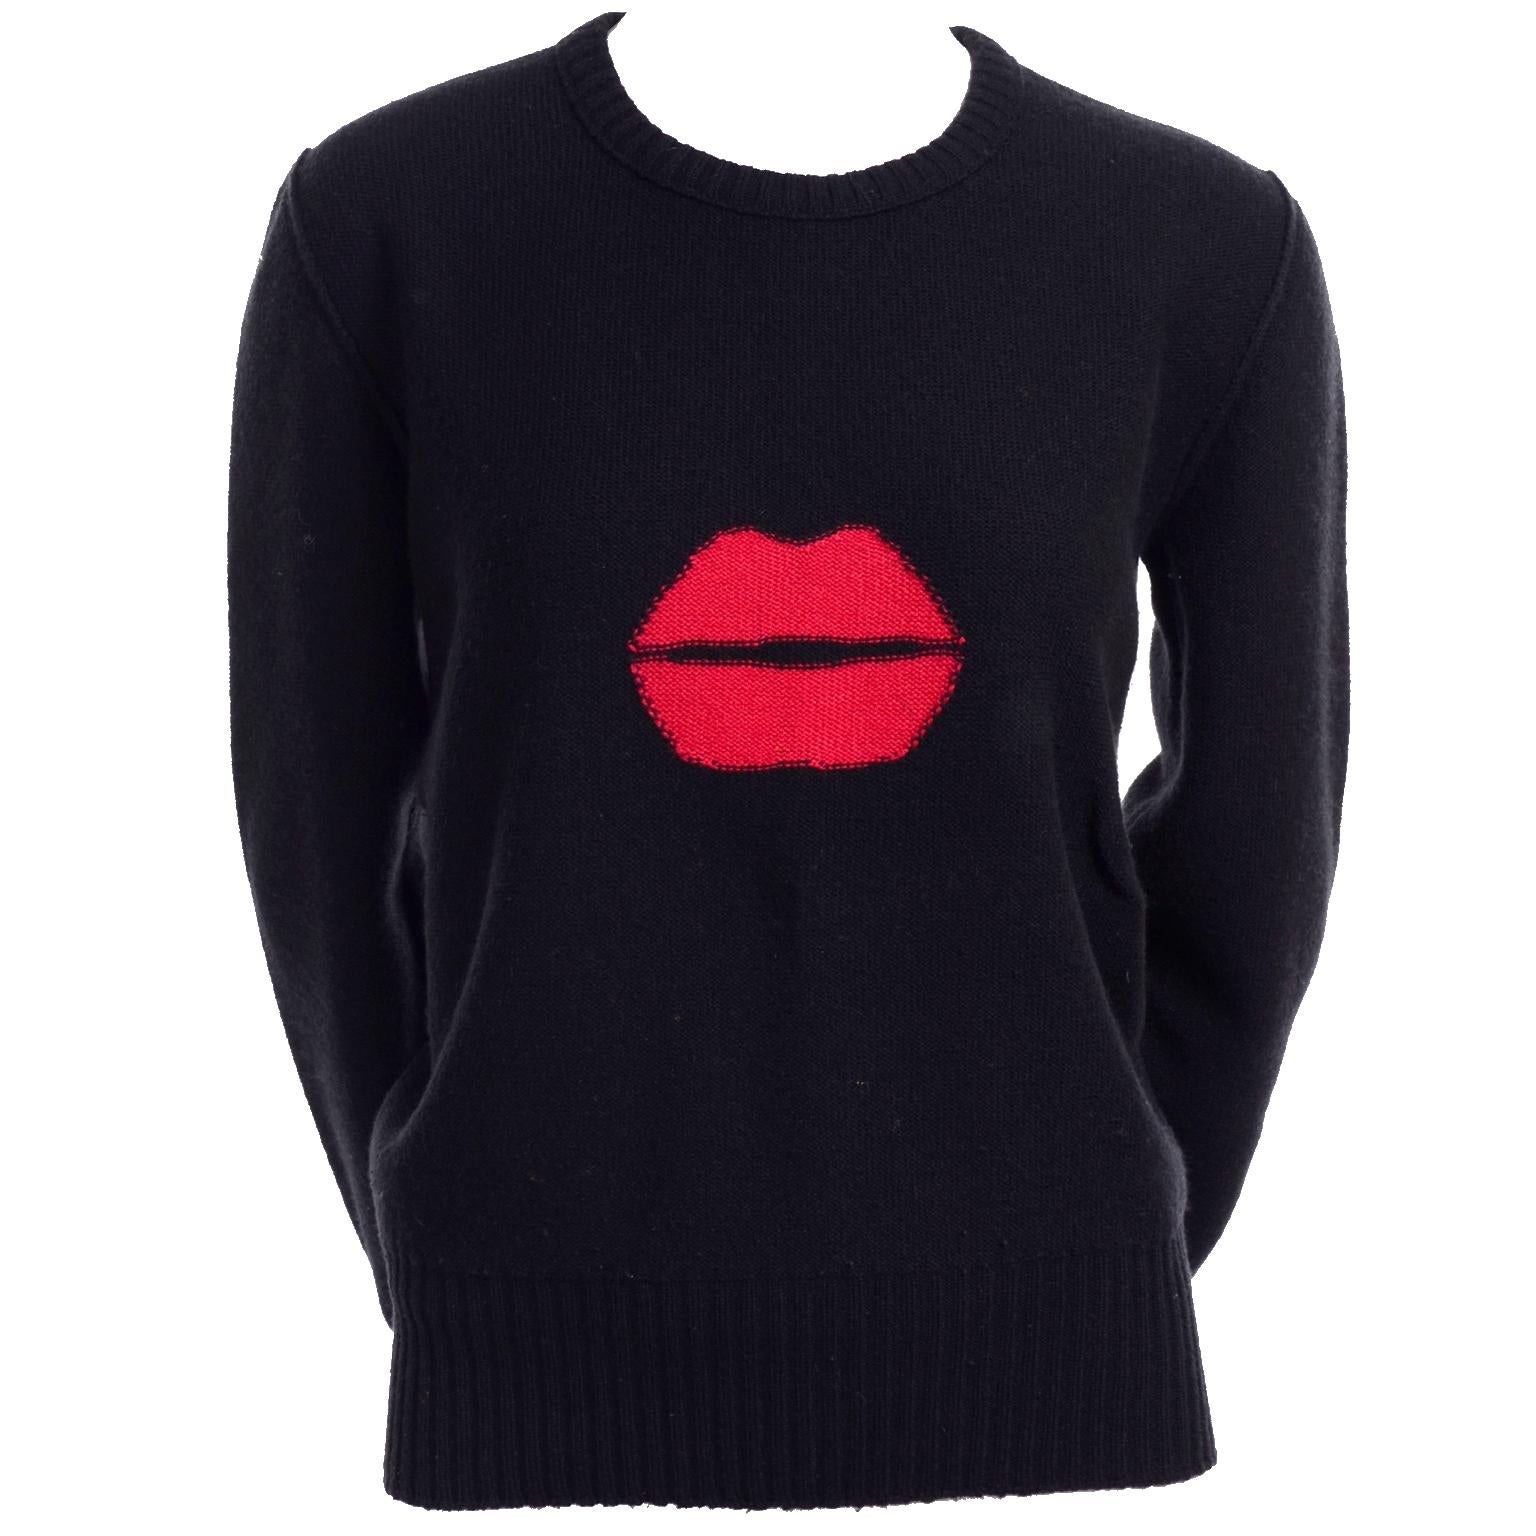 1980s Sonia Rykiel Vintage Black and Red Kiss Sweater in Angora Wool Blend